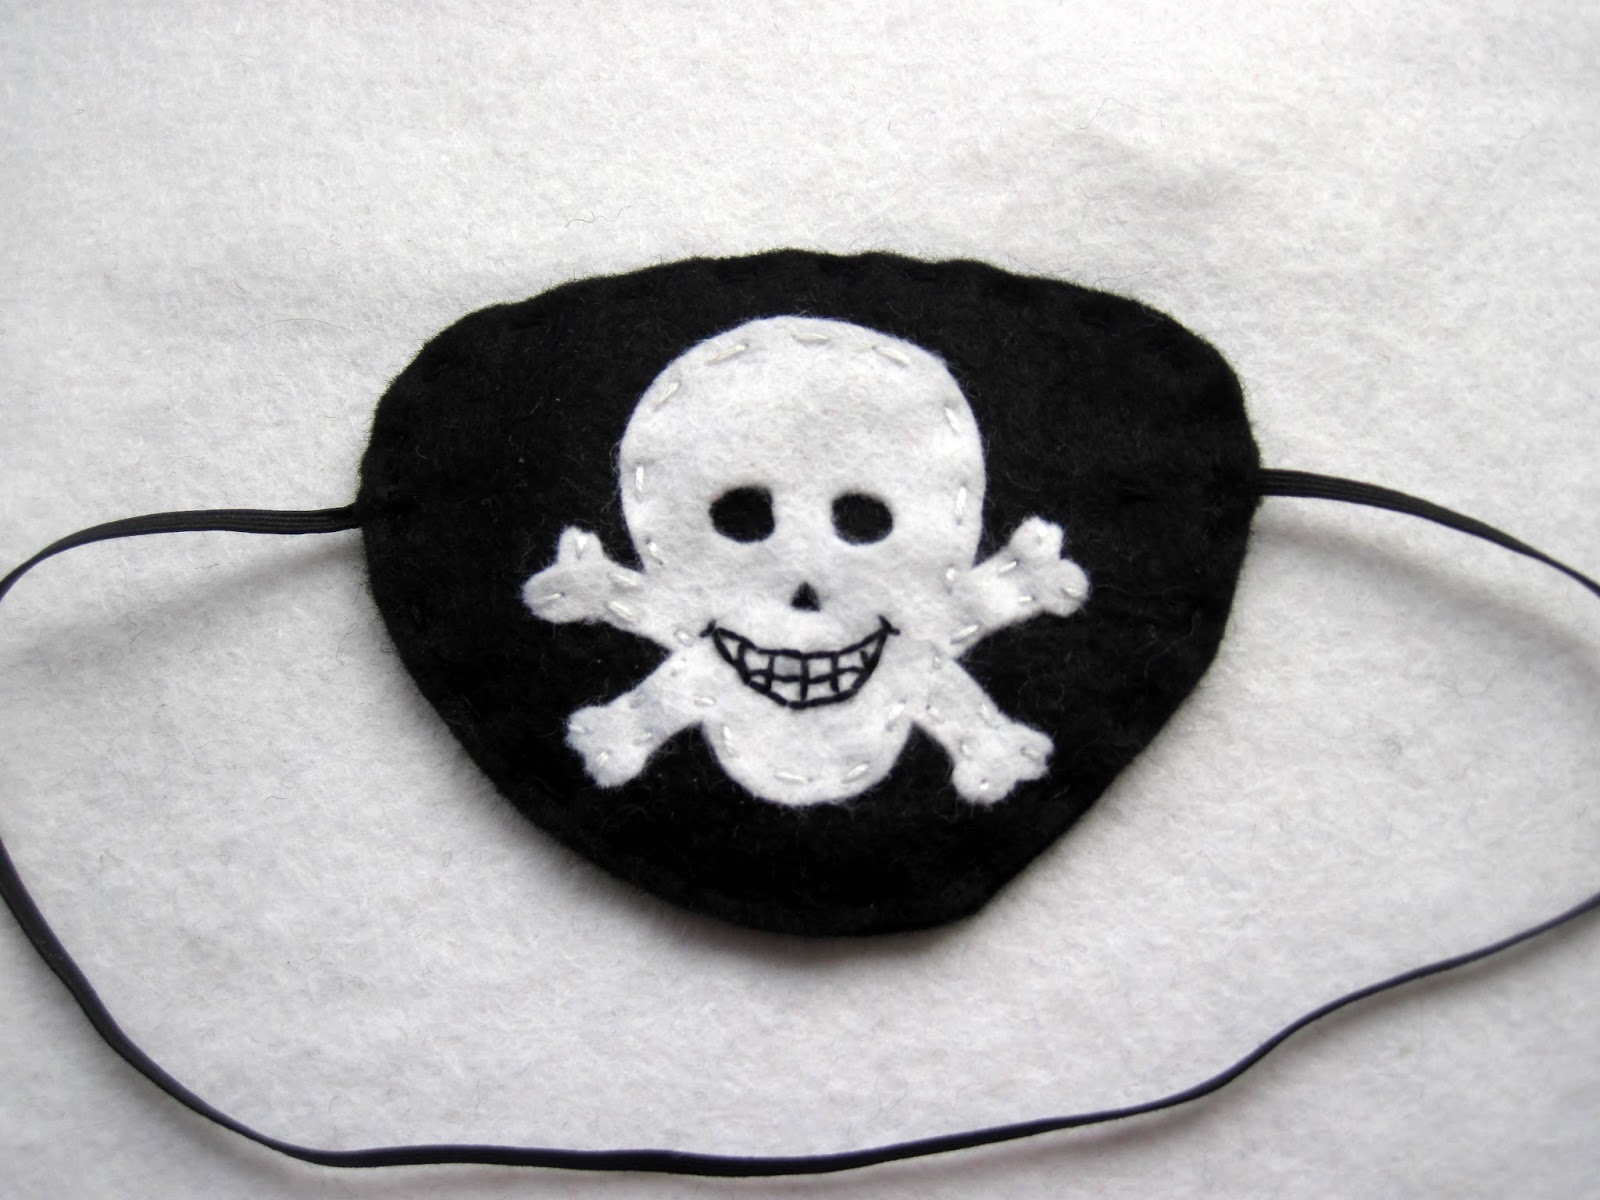 grace-s-favours-craft-adventures-how-to-make-a-felt-diy-pirate-eye